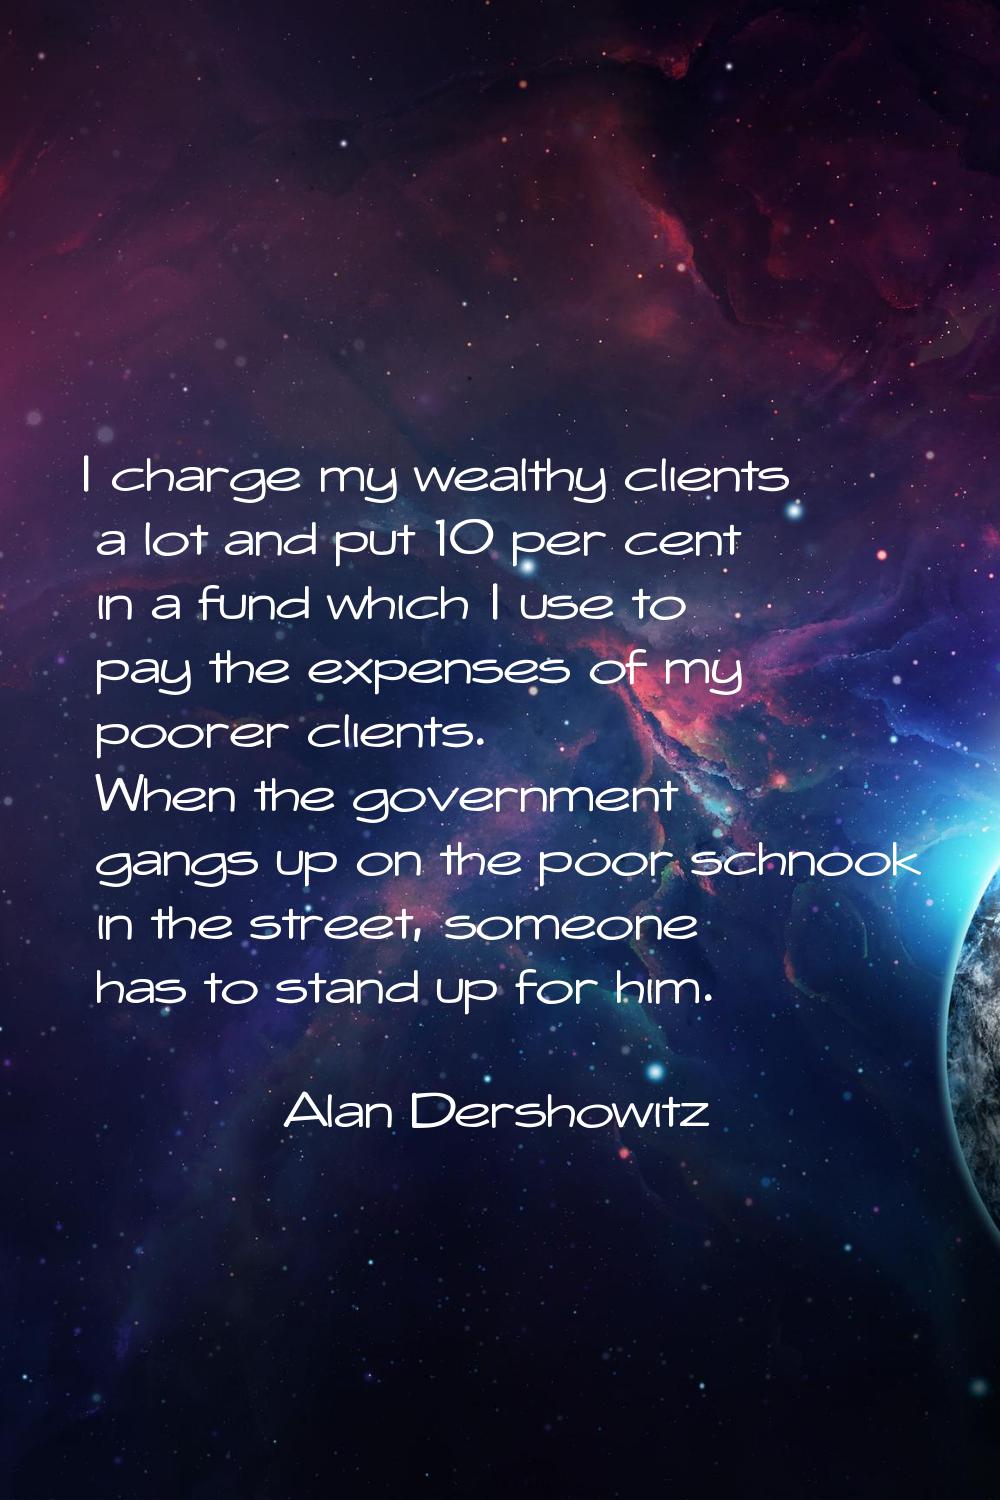 I charge my wealthy clients a lot and put 10 per cent in a fund which I use to pay the expenses of 